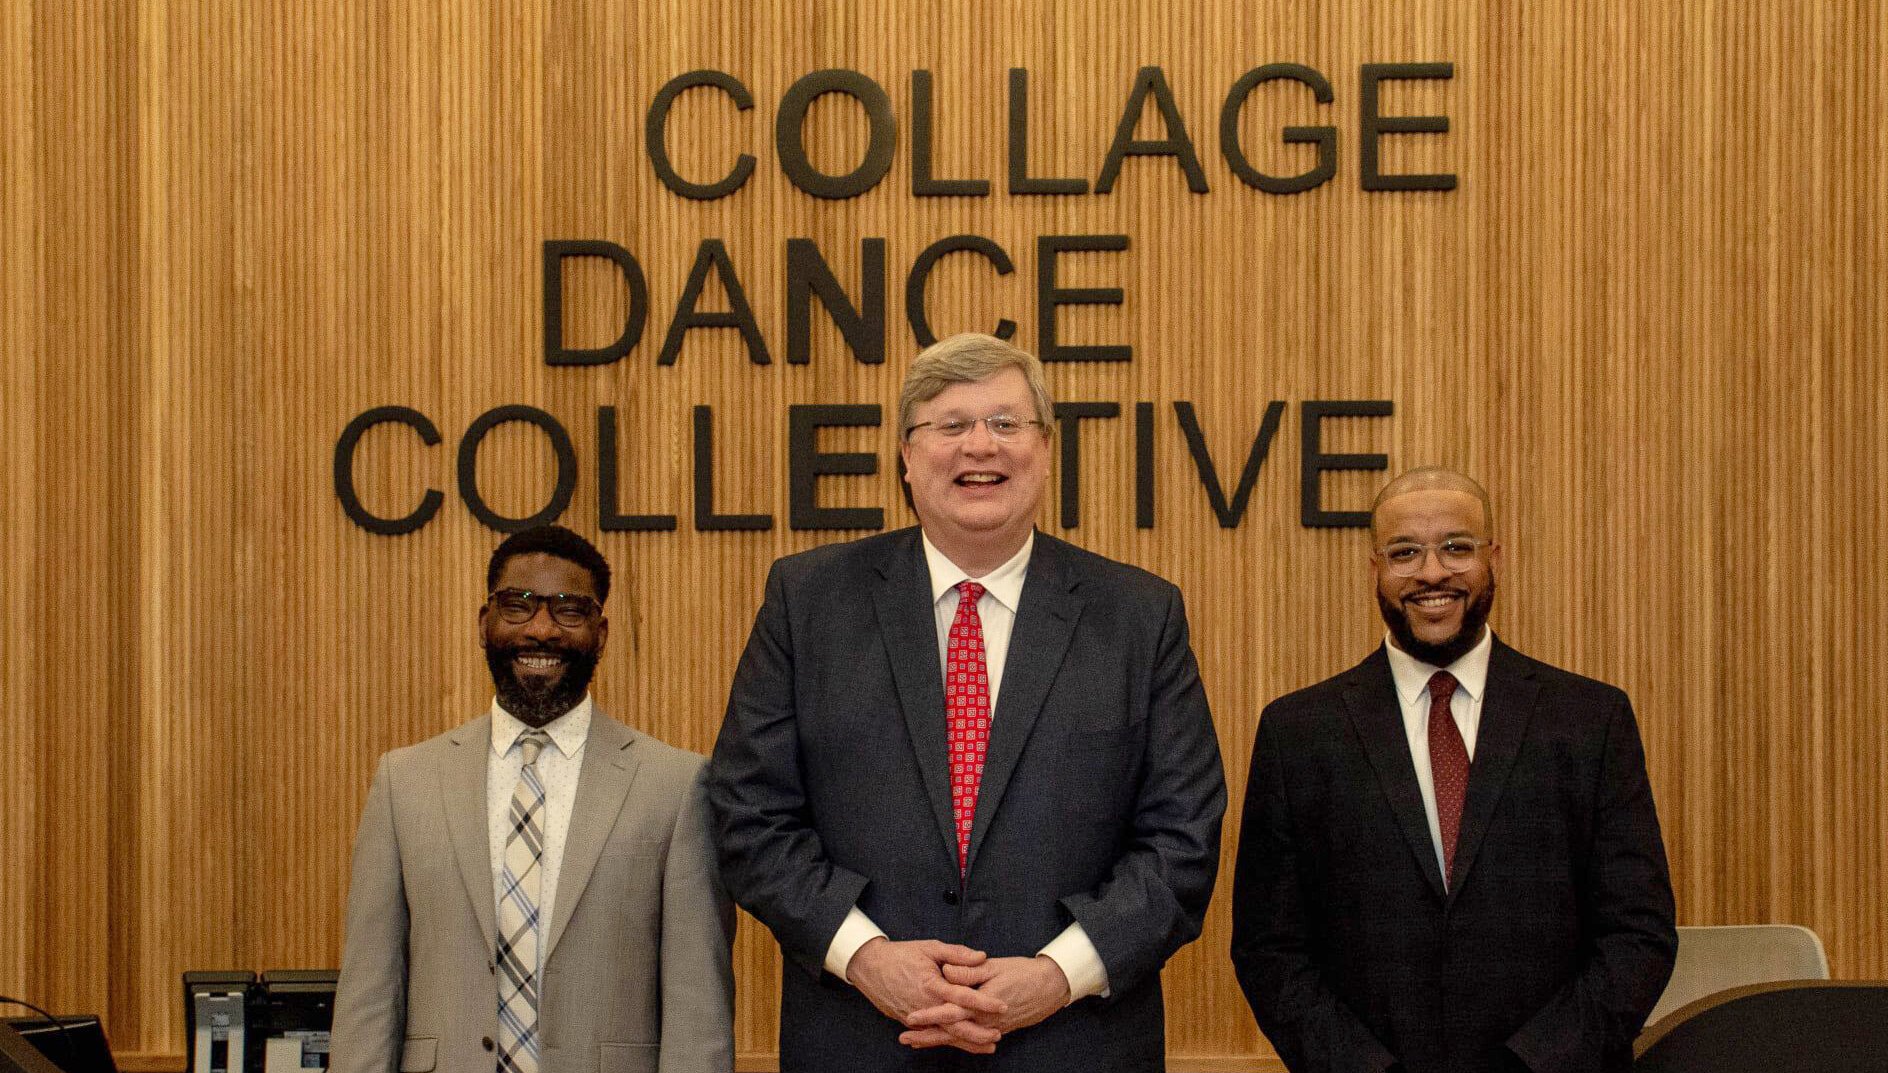 City of Memphis Mayor Jim Strickland (center) with Collage Dance Collective co-founders Kevin Thomas (left) and Marcellus Harper (right). (submitted)